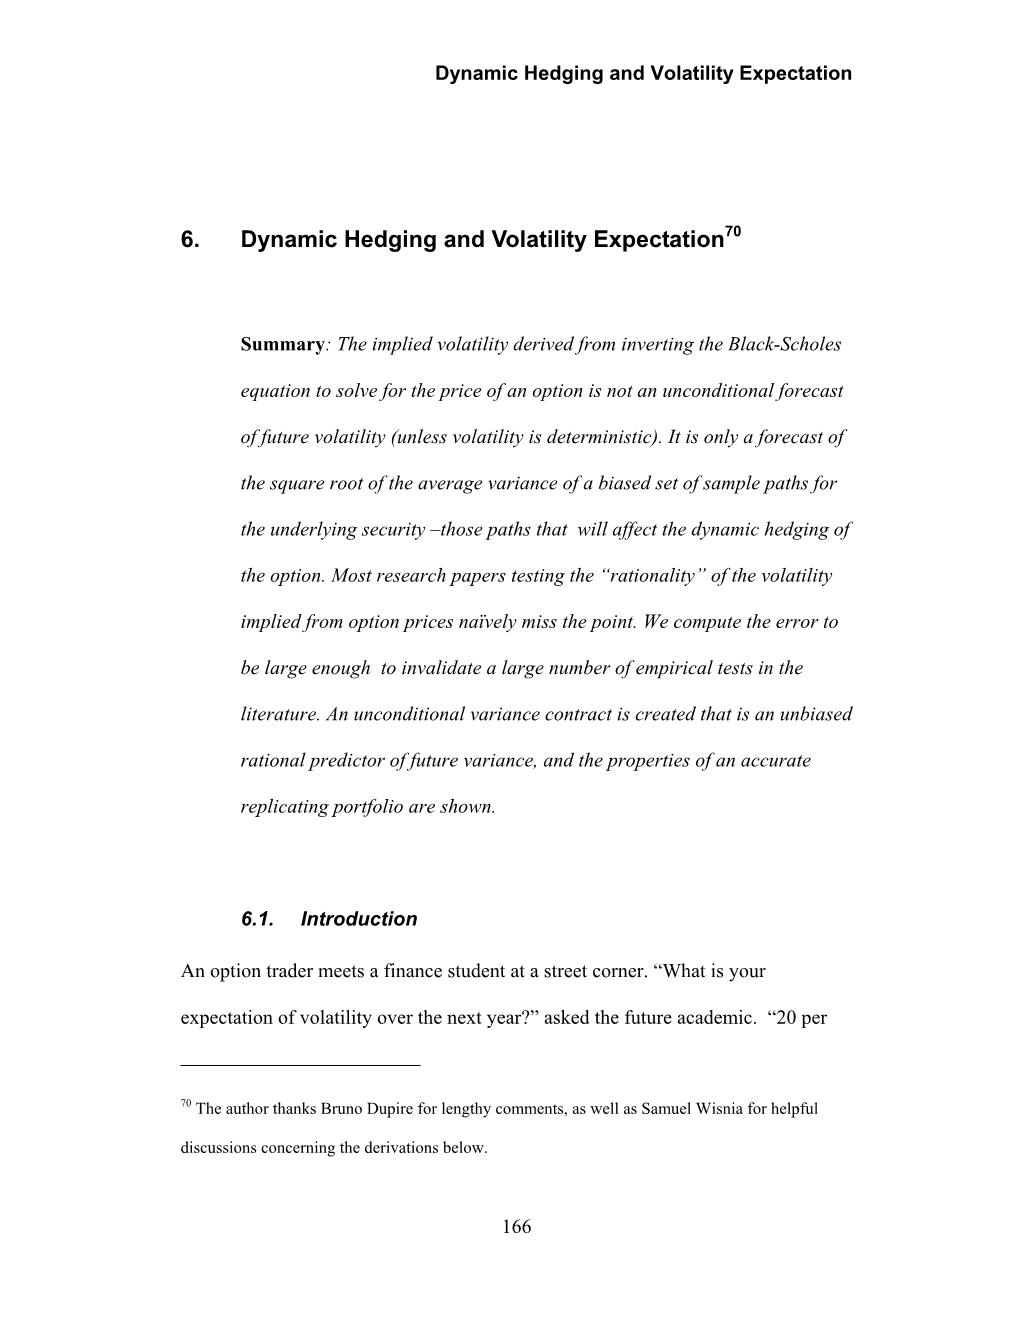 6. Dynamic Hedging and Volatility Expectation70